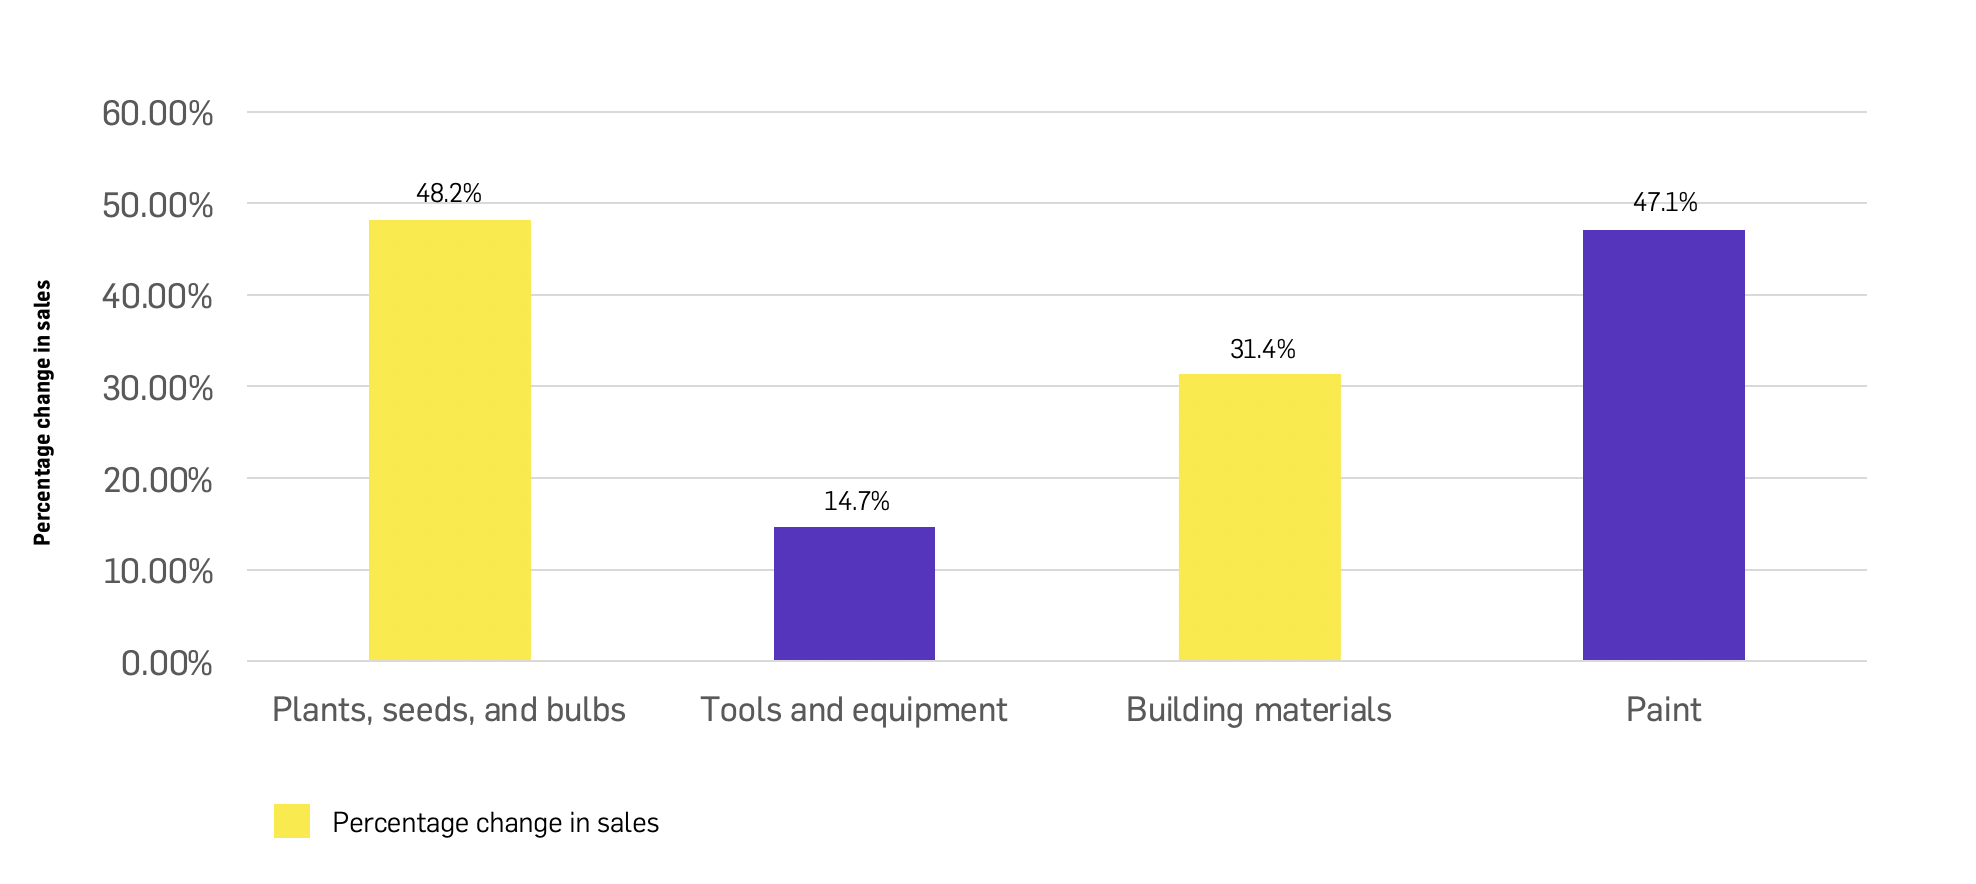 Bar chart showing percentage change in online sales of gardening and home improvement products in the UK in 2020